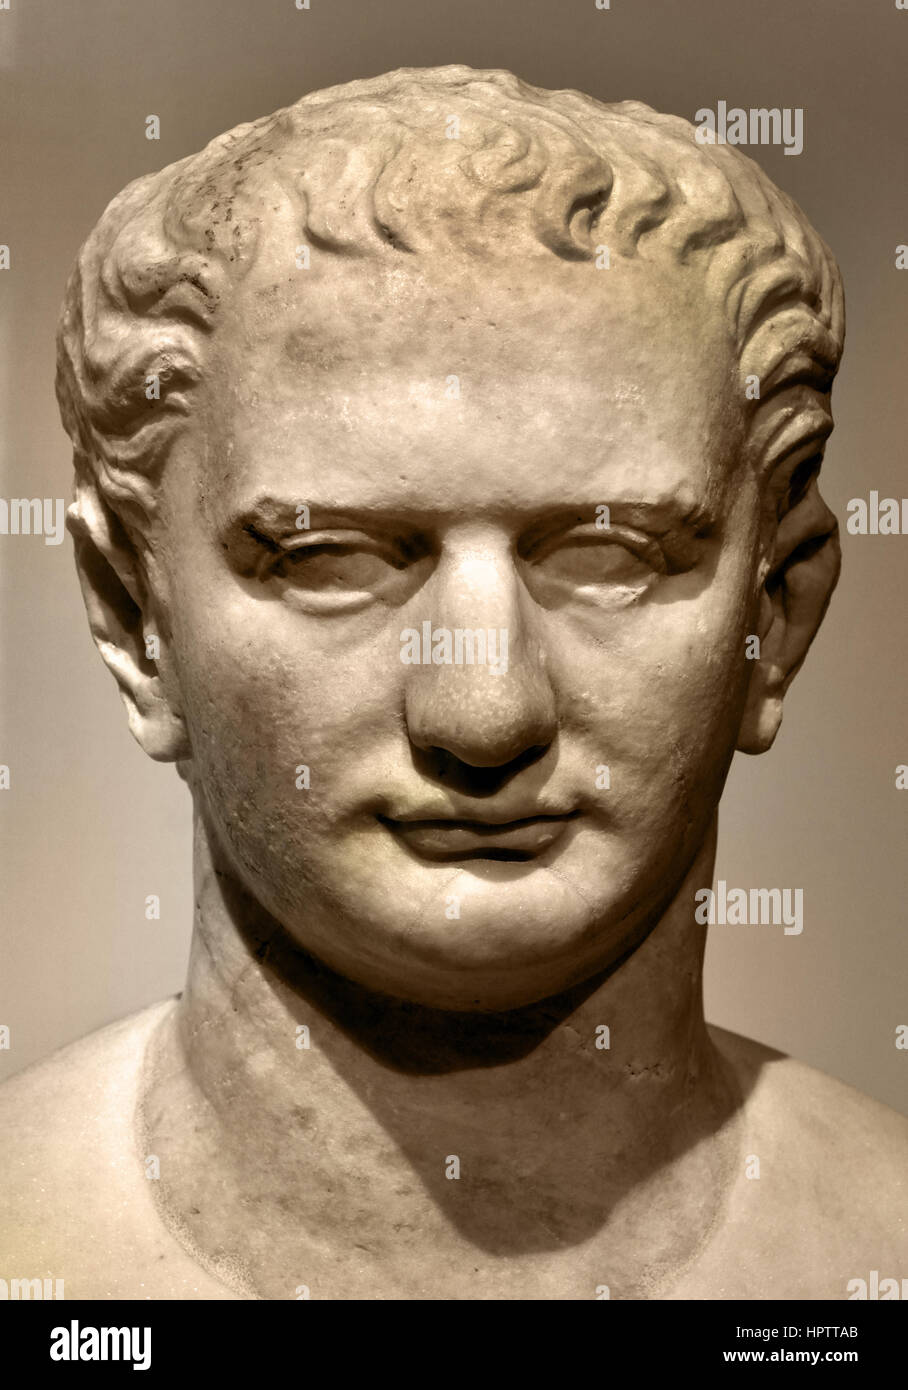 Bust of Emperor Domitianus - Domitian ( Titus Flavius Caesar Domitianus 51 –96 Emperor of Rome from 81 to 96. He was the younger brother of Titus and son of Vespasian, Roman . Stock Photo